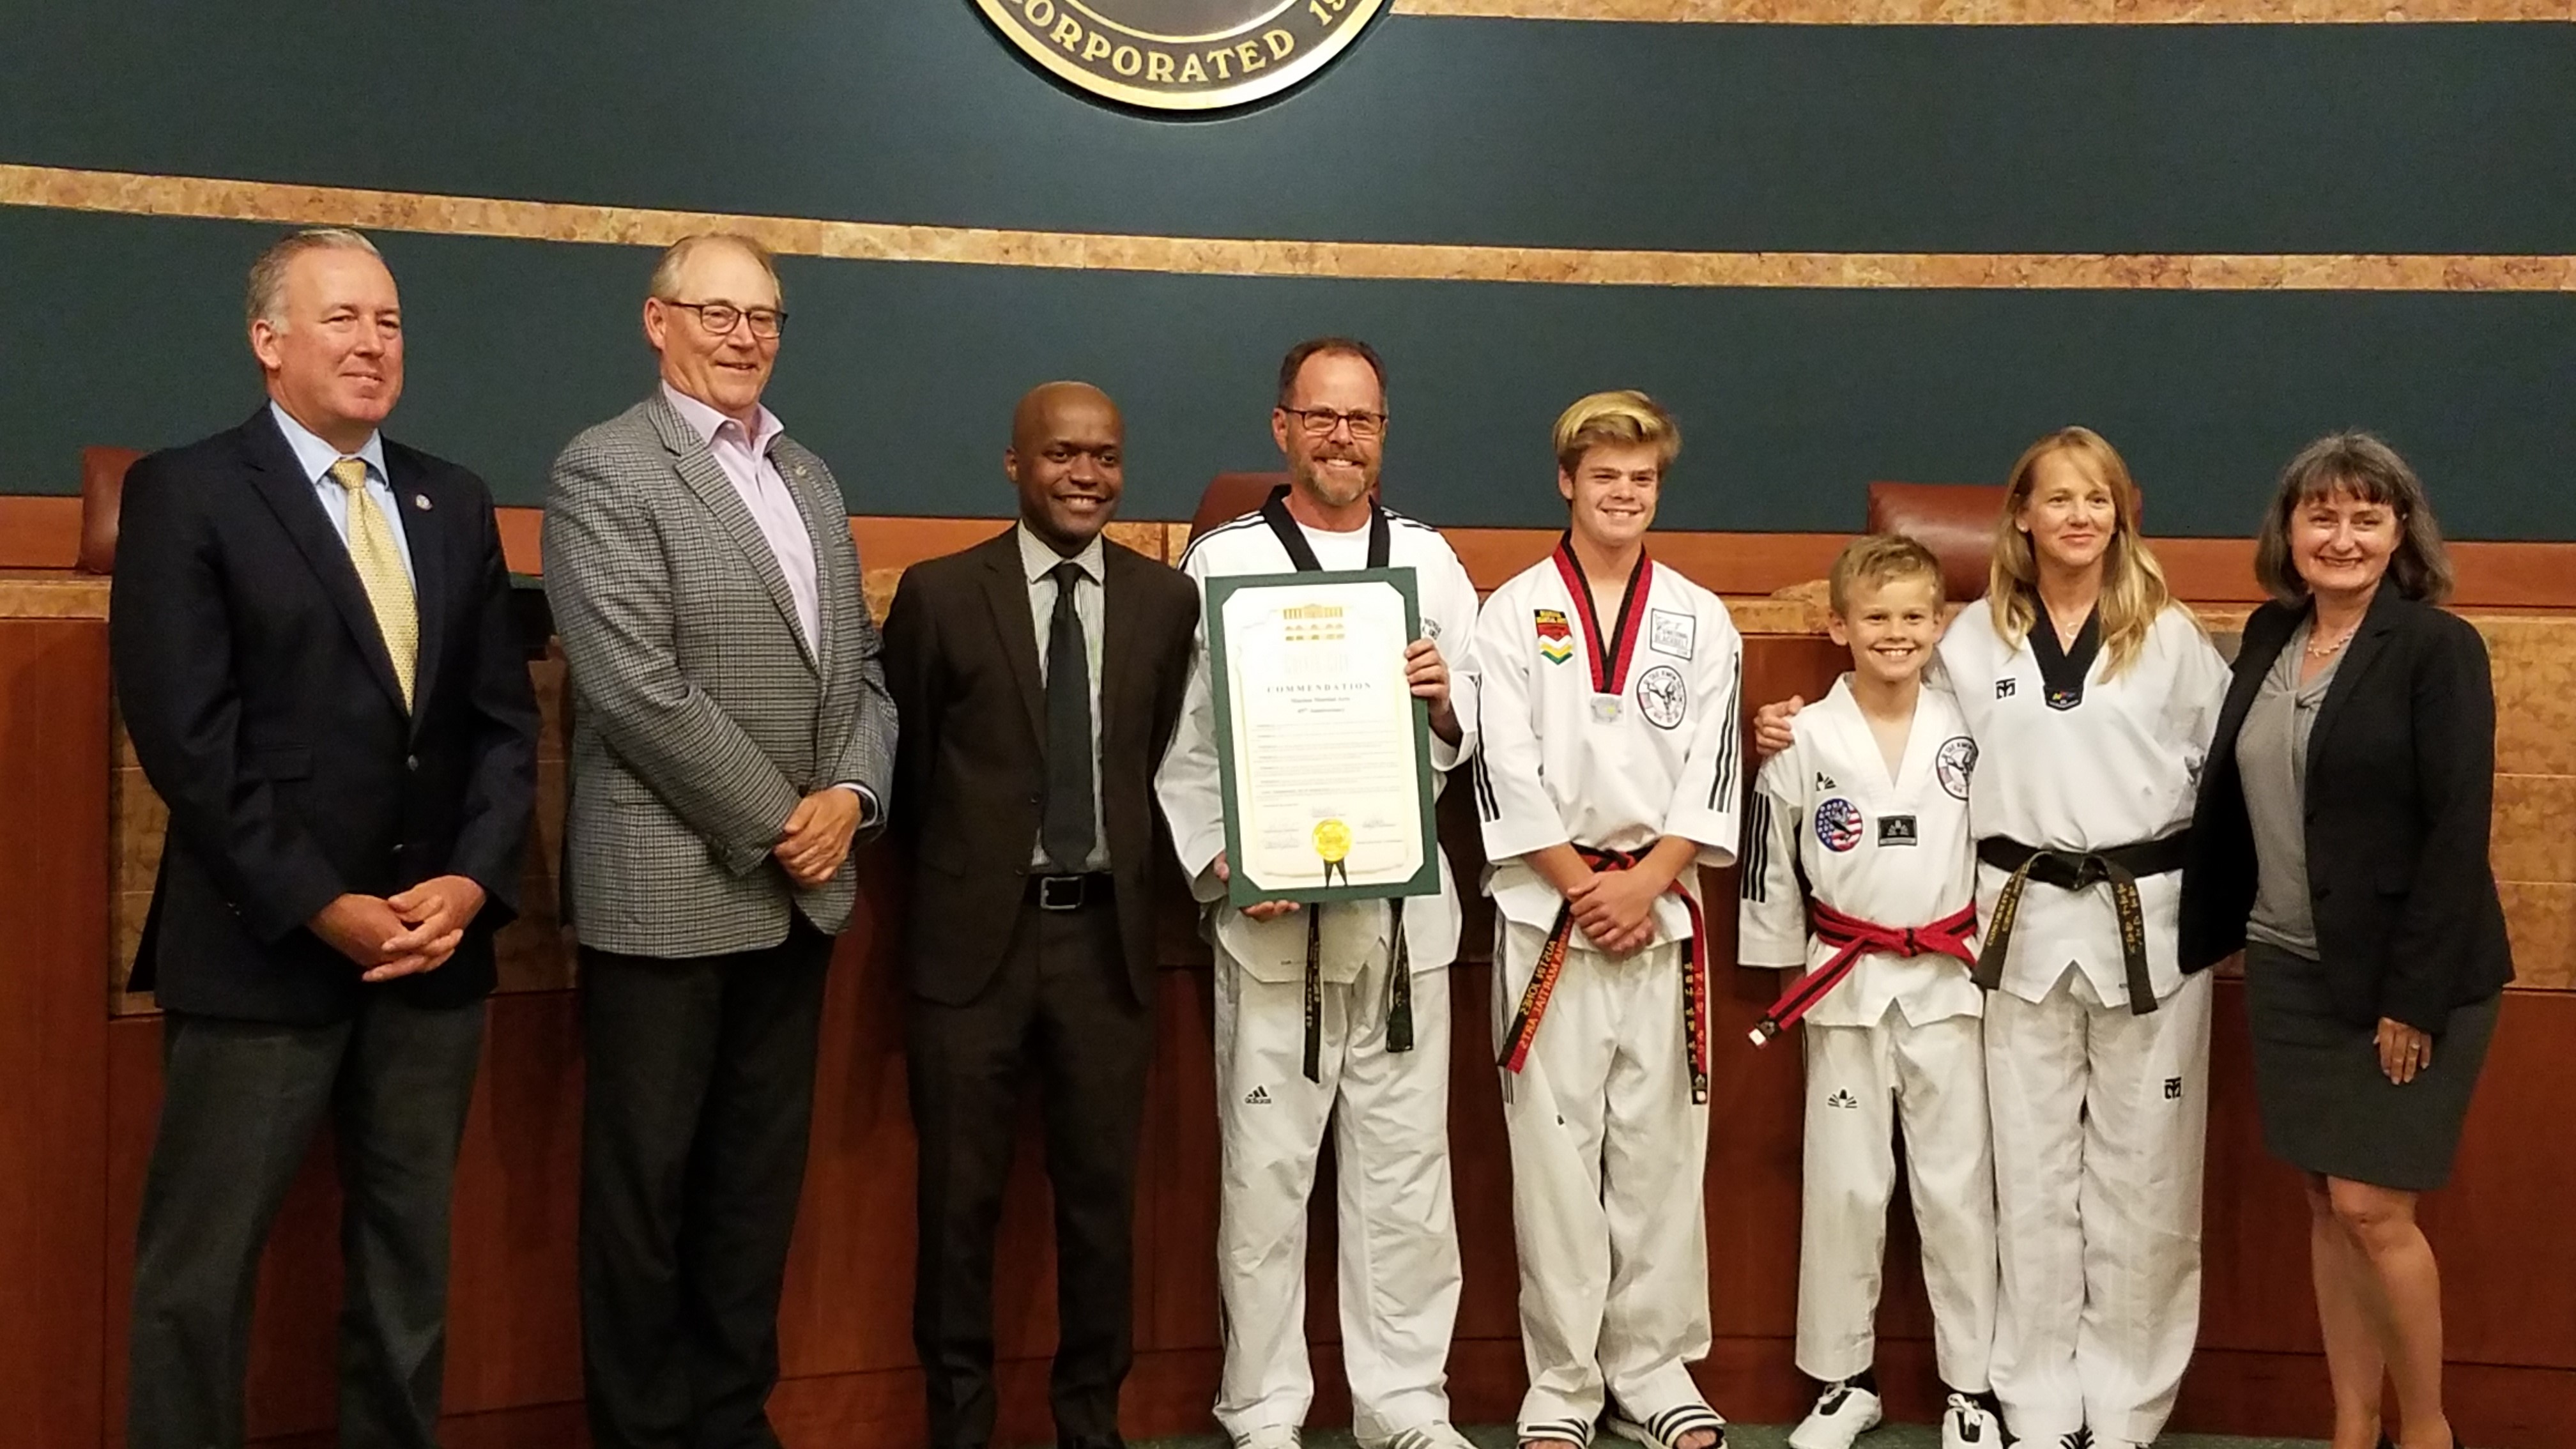 45th Anniversary Commendation from Culver City Council